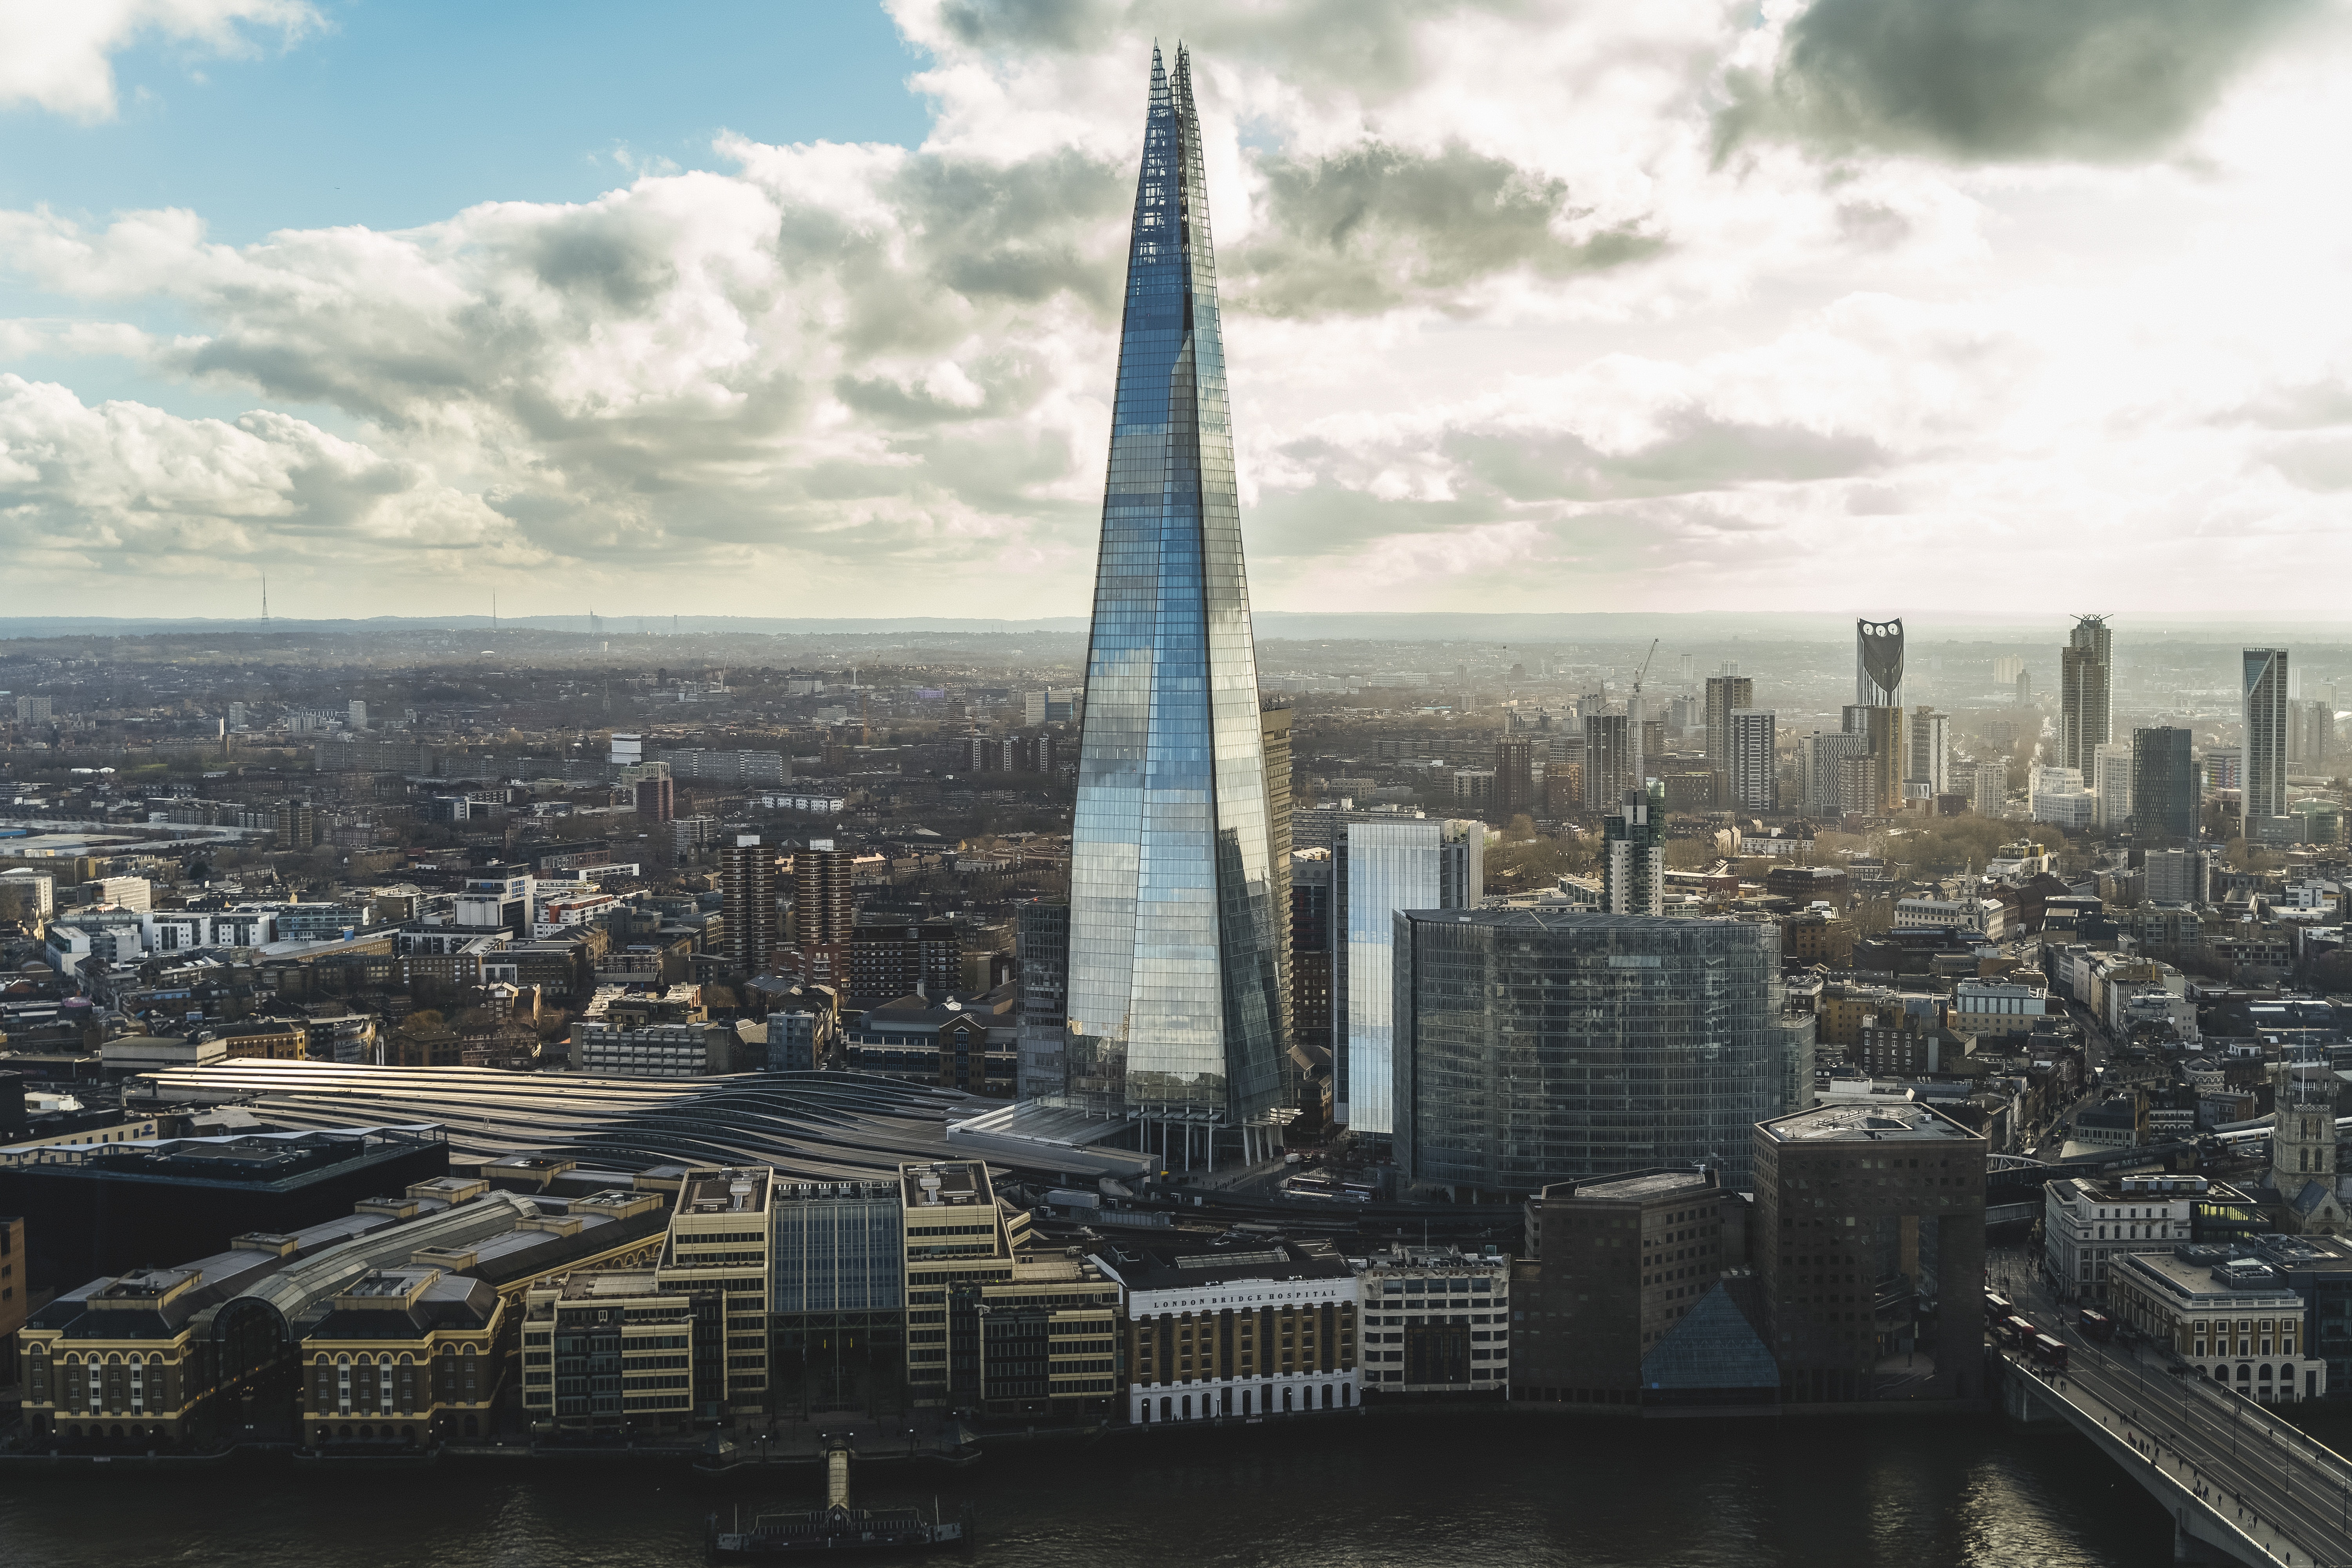 Iconic construction projects: The Shard